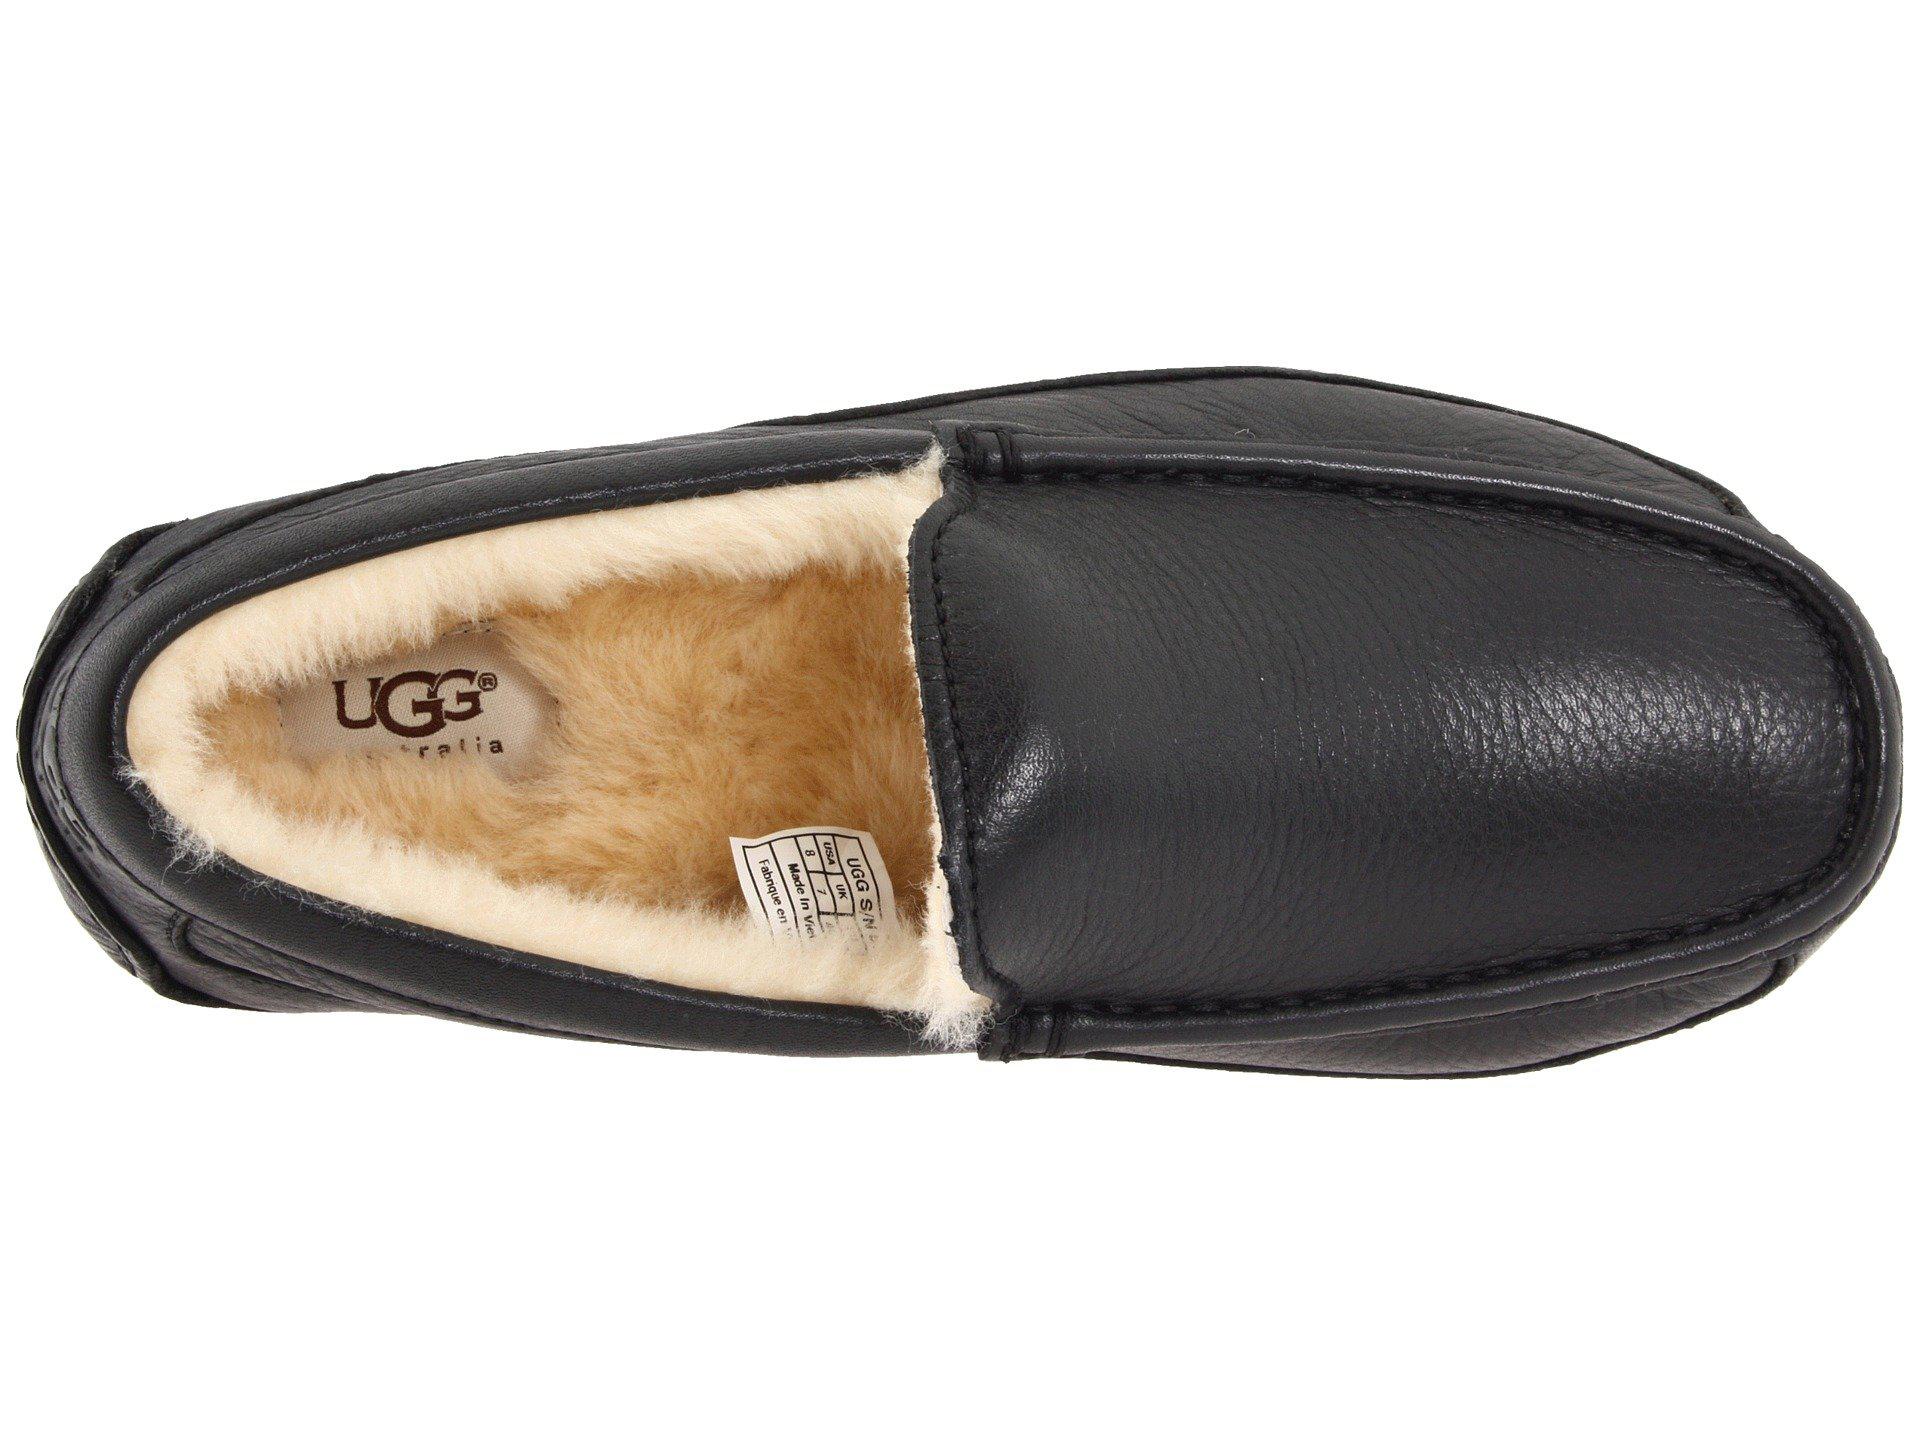 leather ugg mens slippers